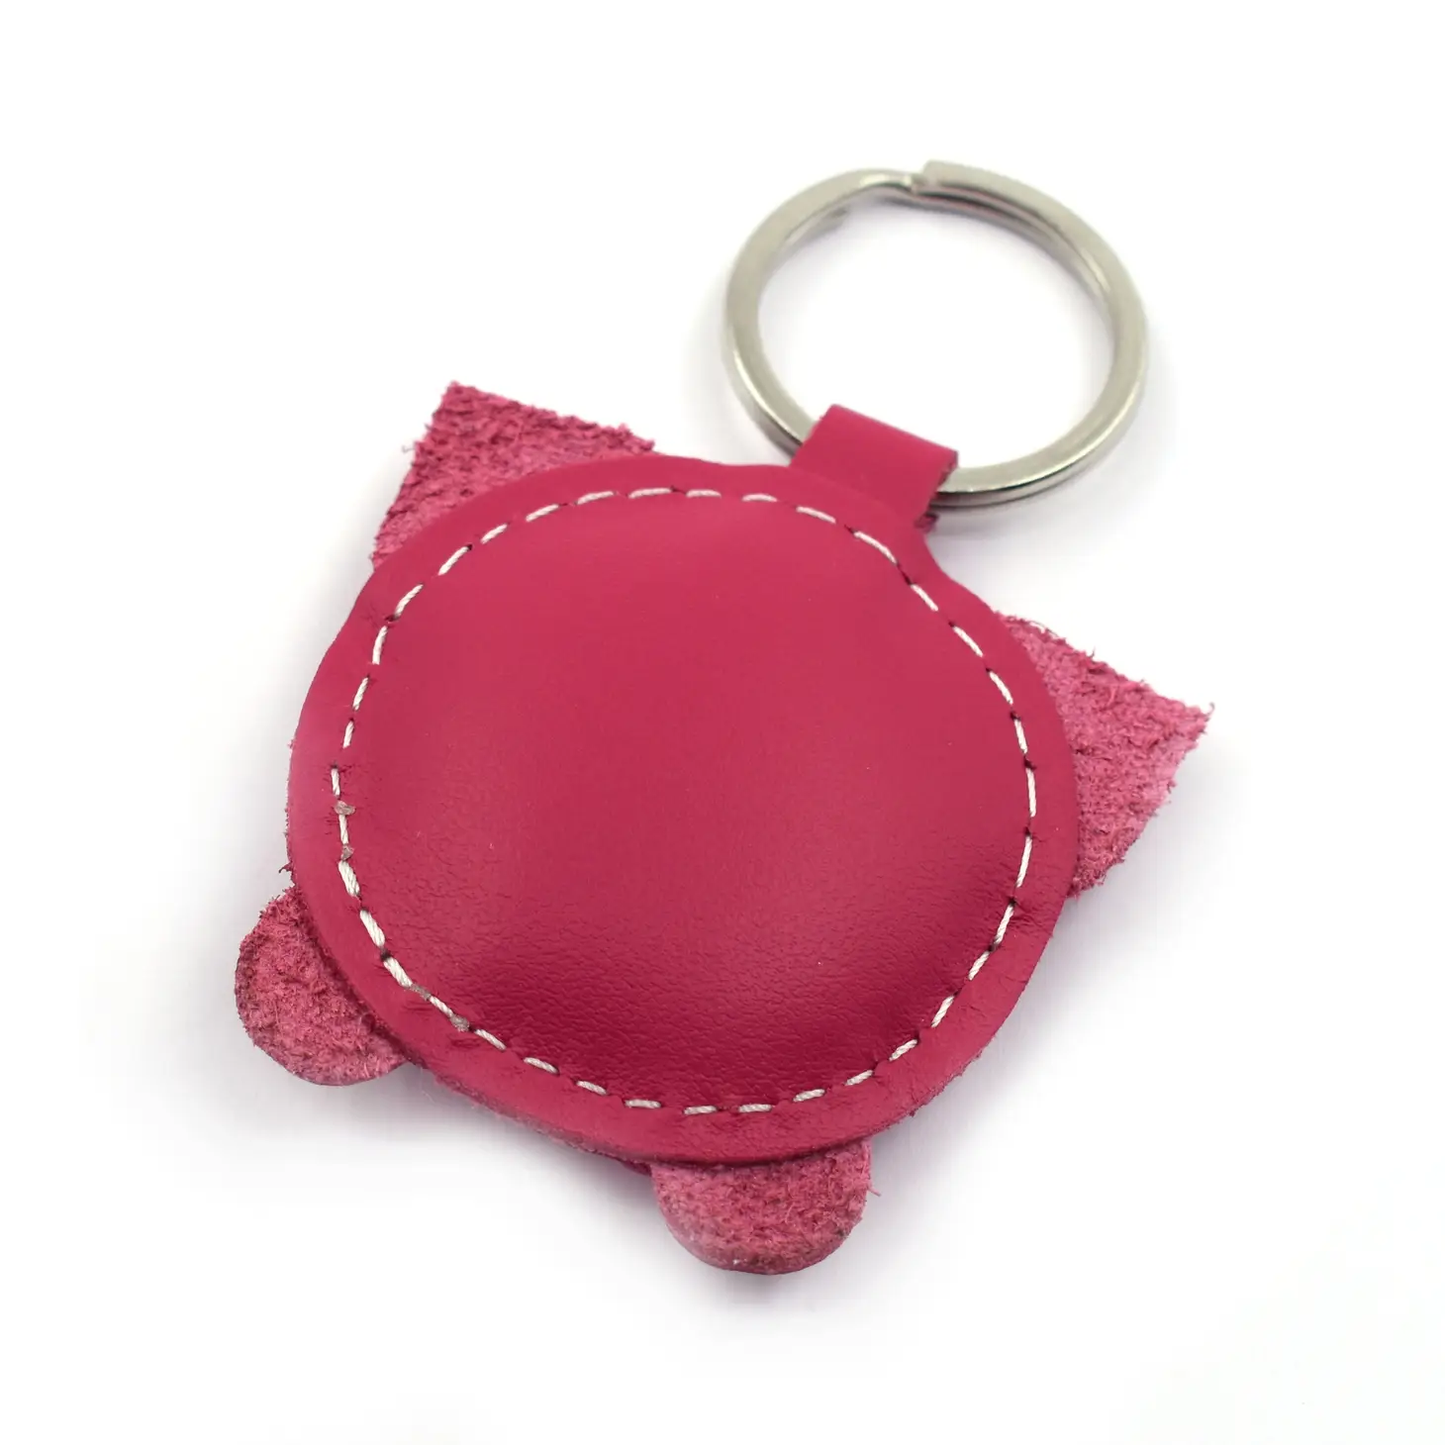 Cute Pig Leather Keychain